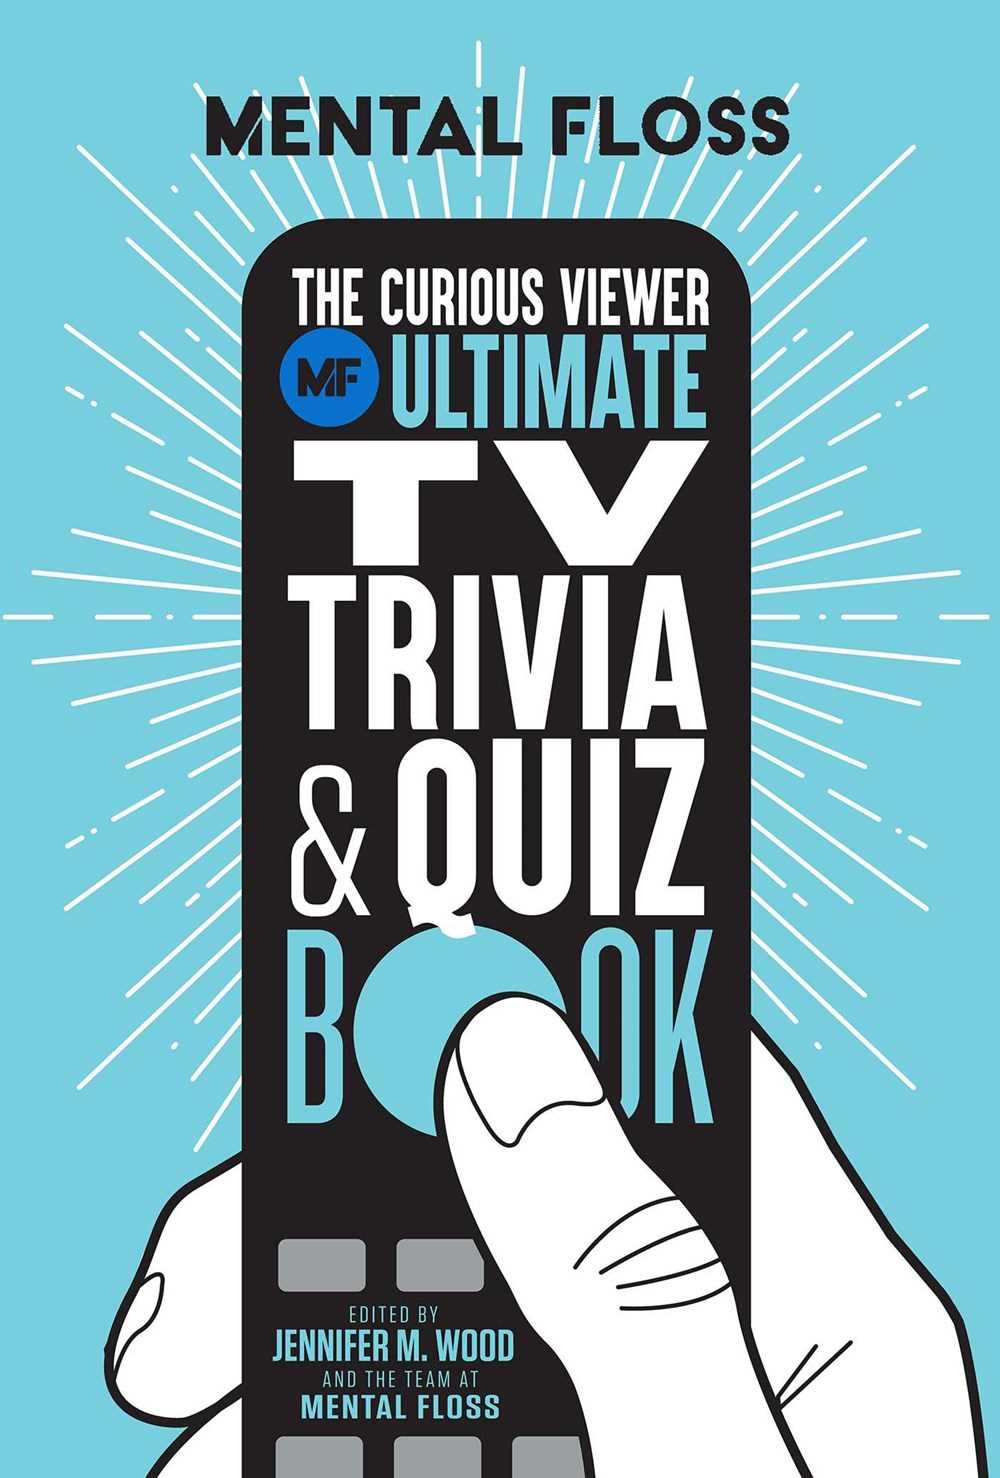 The Curious Viewer Ultimate TV Trivia &amp; Quiz Book (Mental Floss)